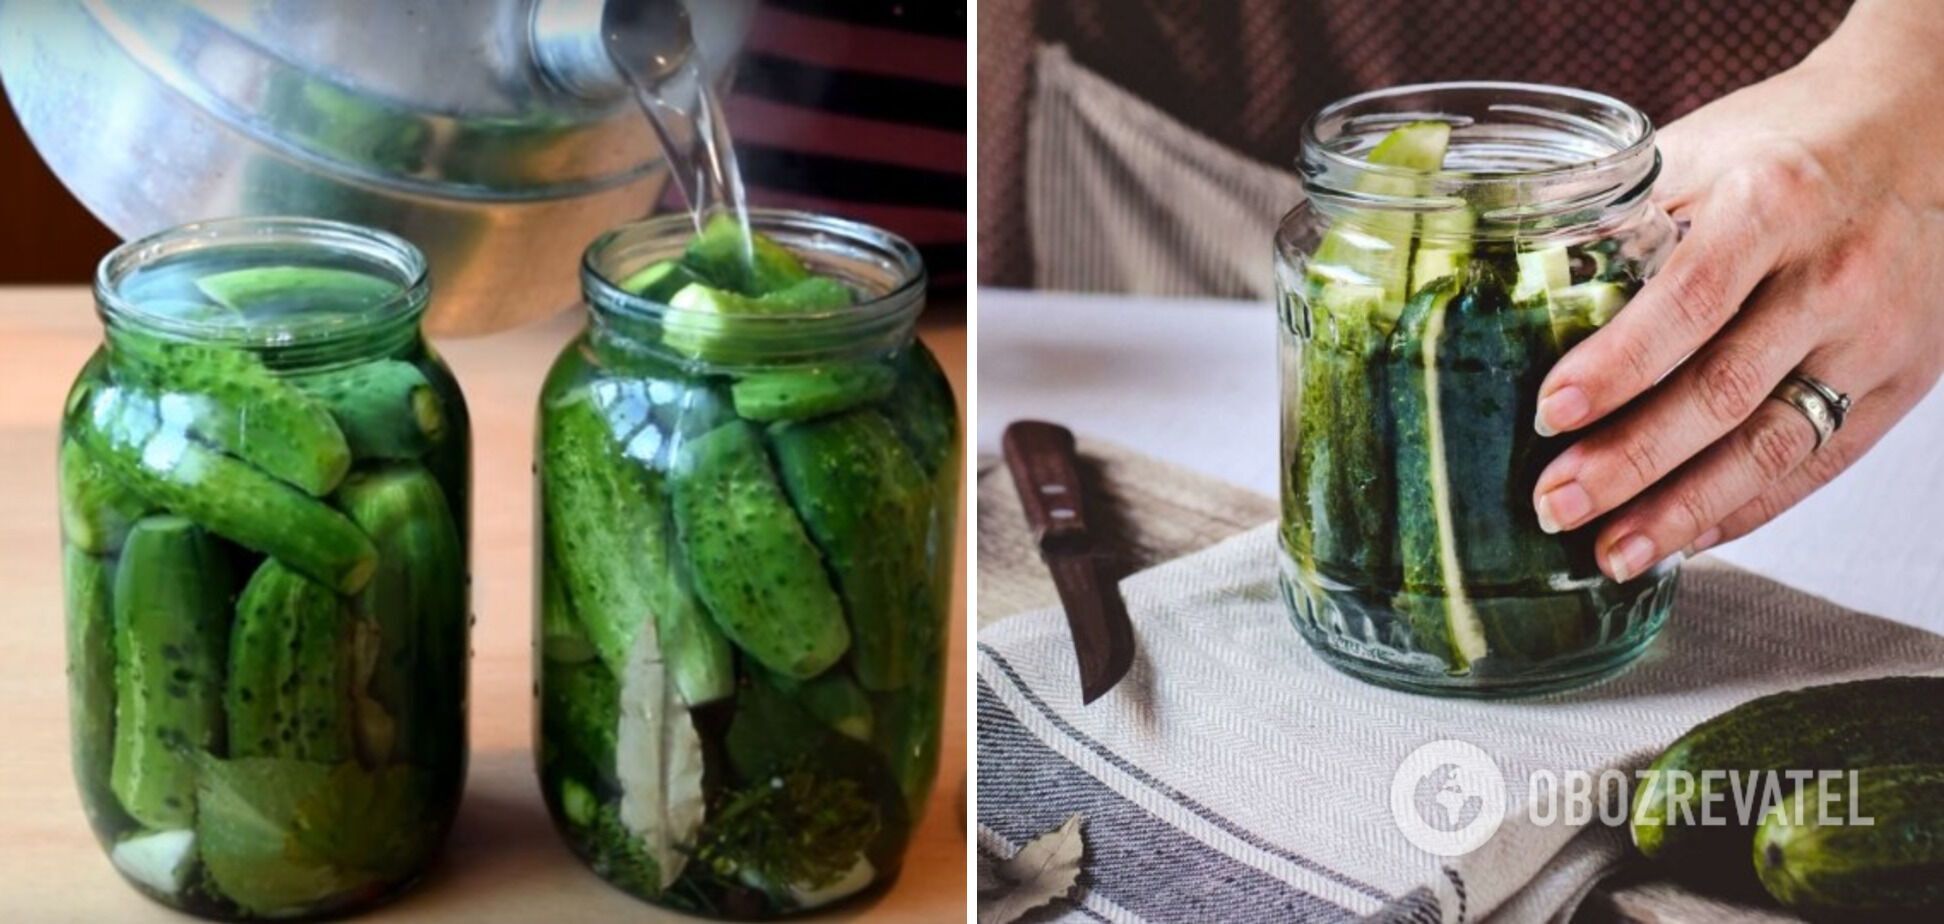 How not to store fresh cucumbers: they will quickly wither and become soft